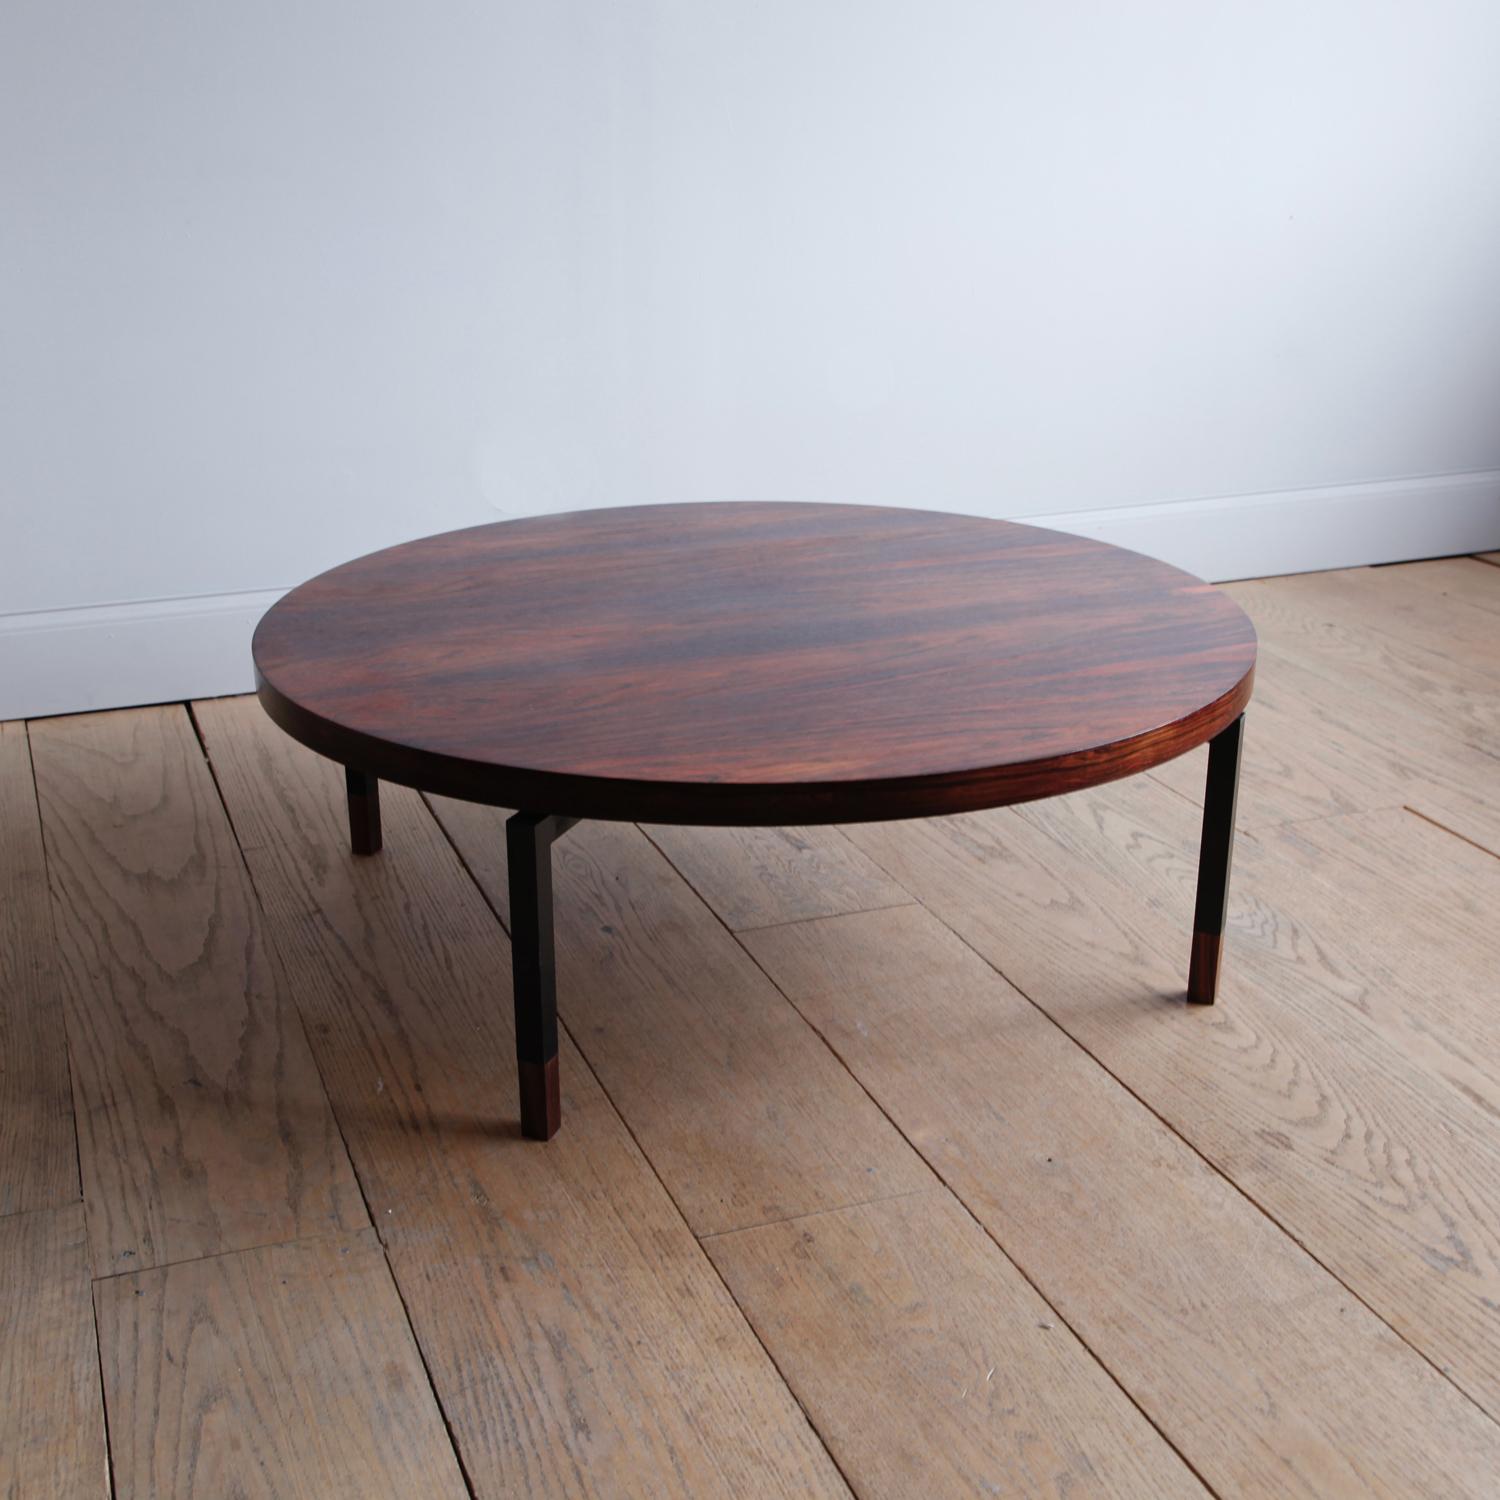 Minimalist design, maximalist materials. A large, low circular rosewood coffee table with sharply angled steel legs ending in solid rosewood feet.